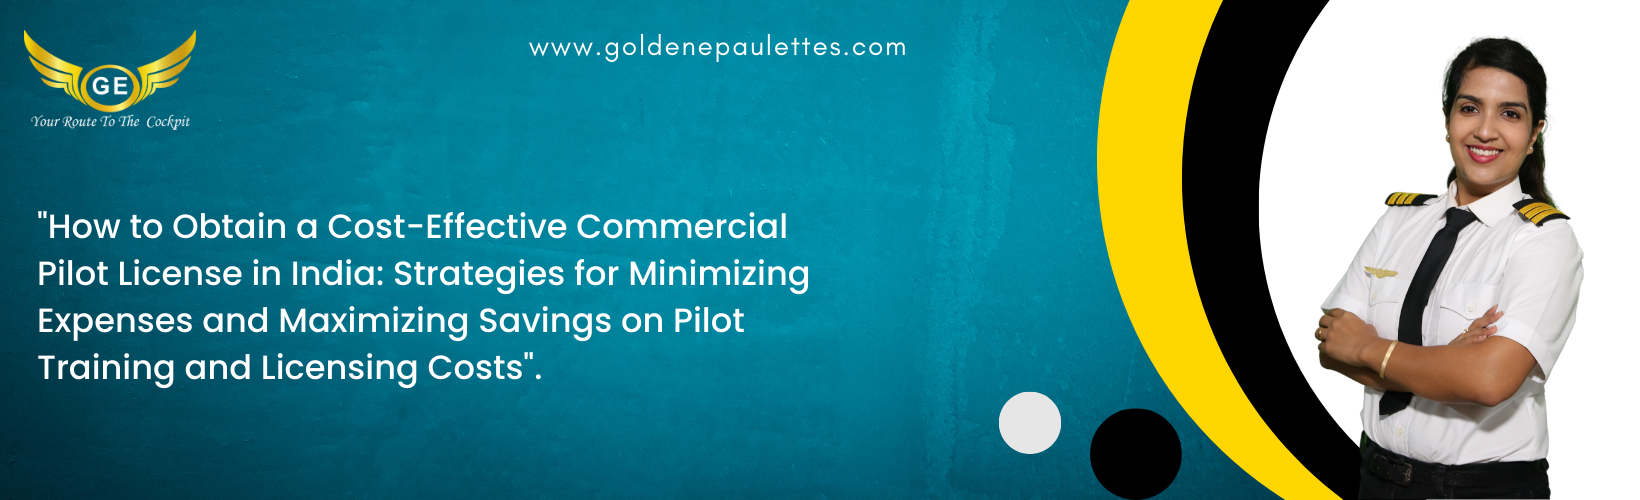 Cost-Effective Ways to Obtain a Commercial Pilot License in India